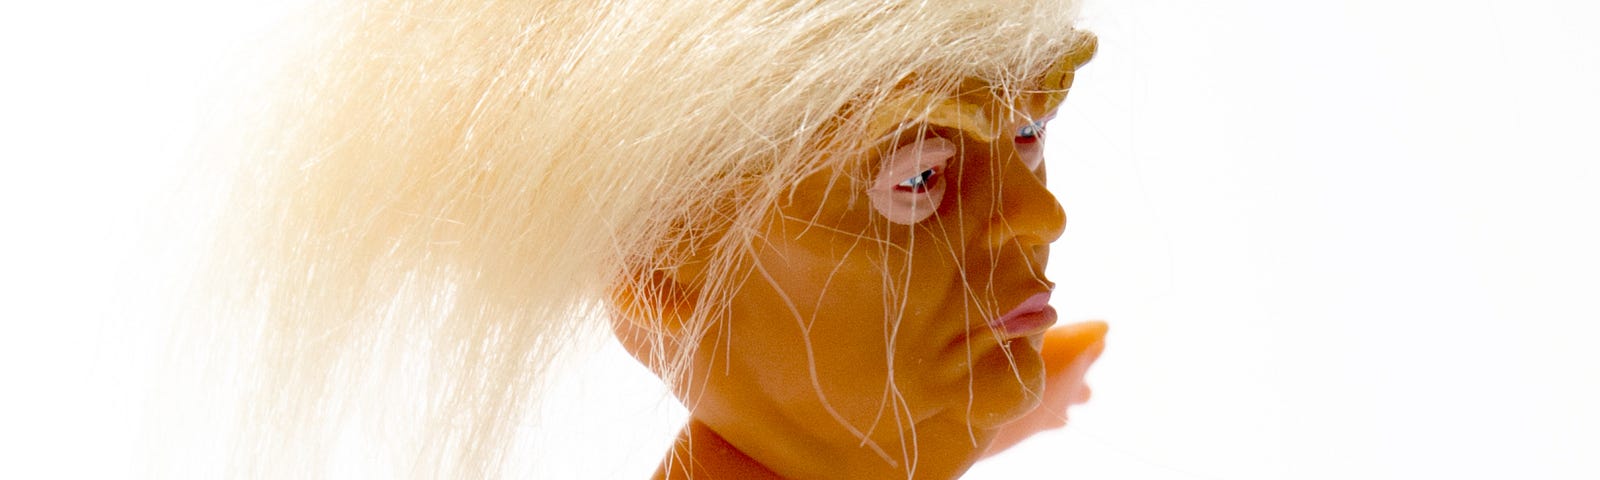 Naked Trump doll with wild hair.